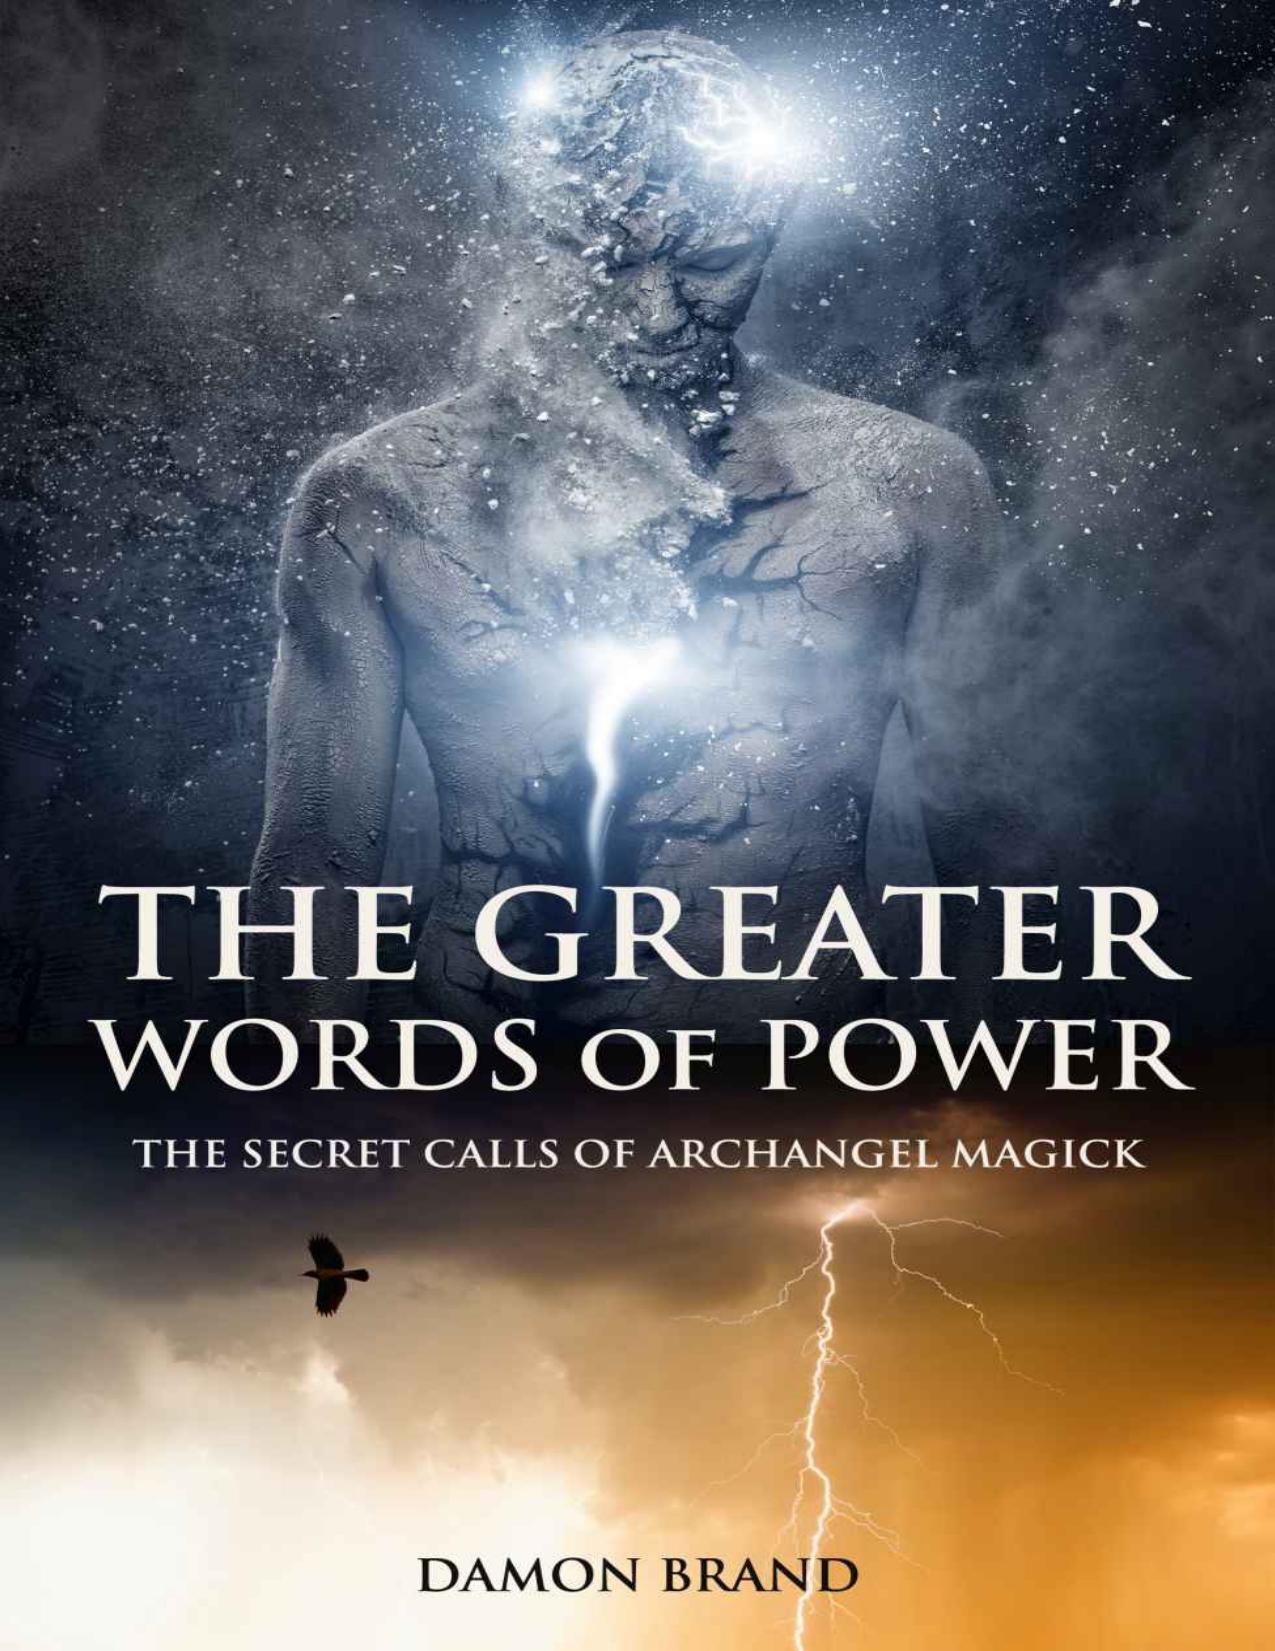 The Greater Words of Power: The Secret Calls of Archangel Magick by Damon Brand